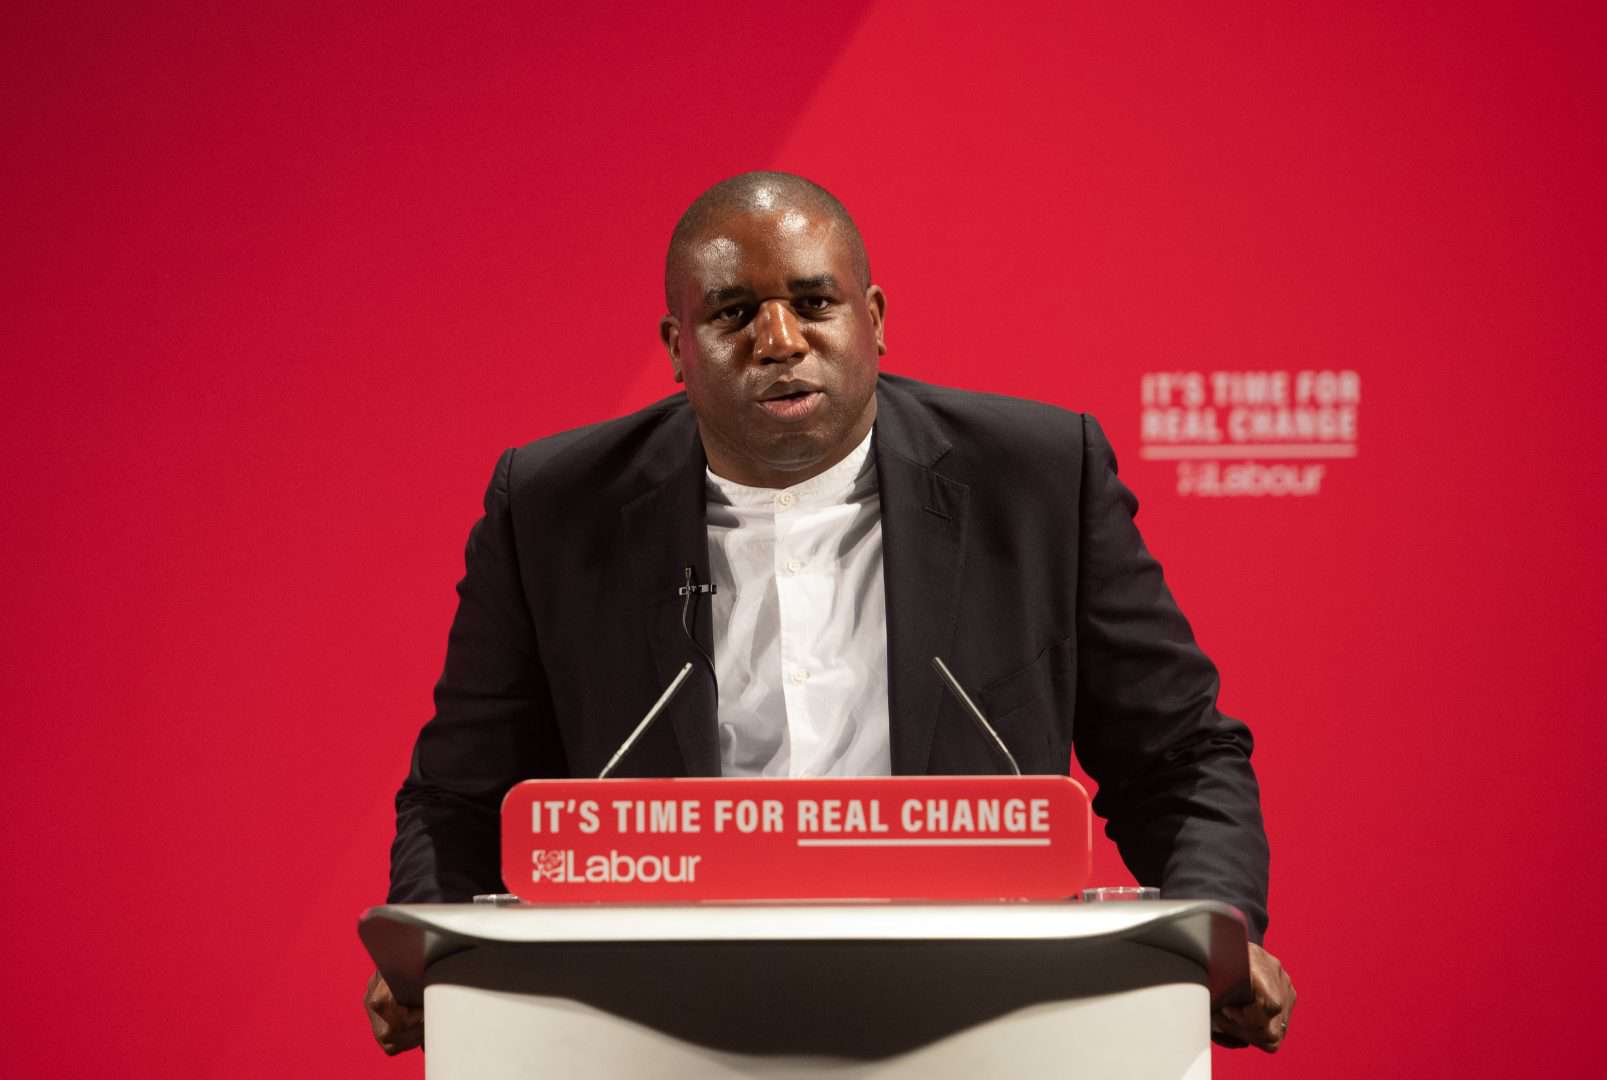 Labour’s David Lammy rules himself out of race to succeed Jeremy Corbyn